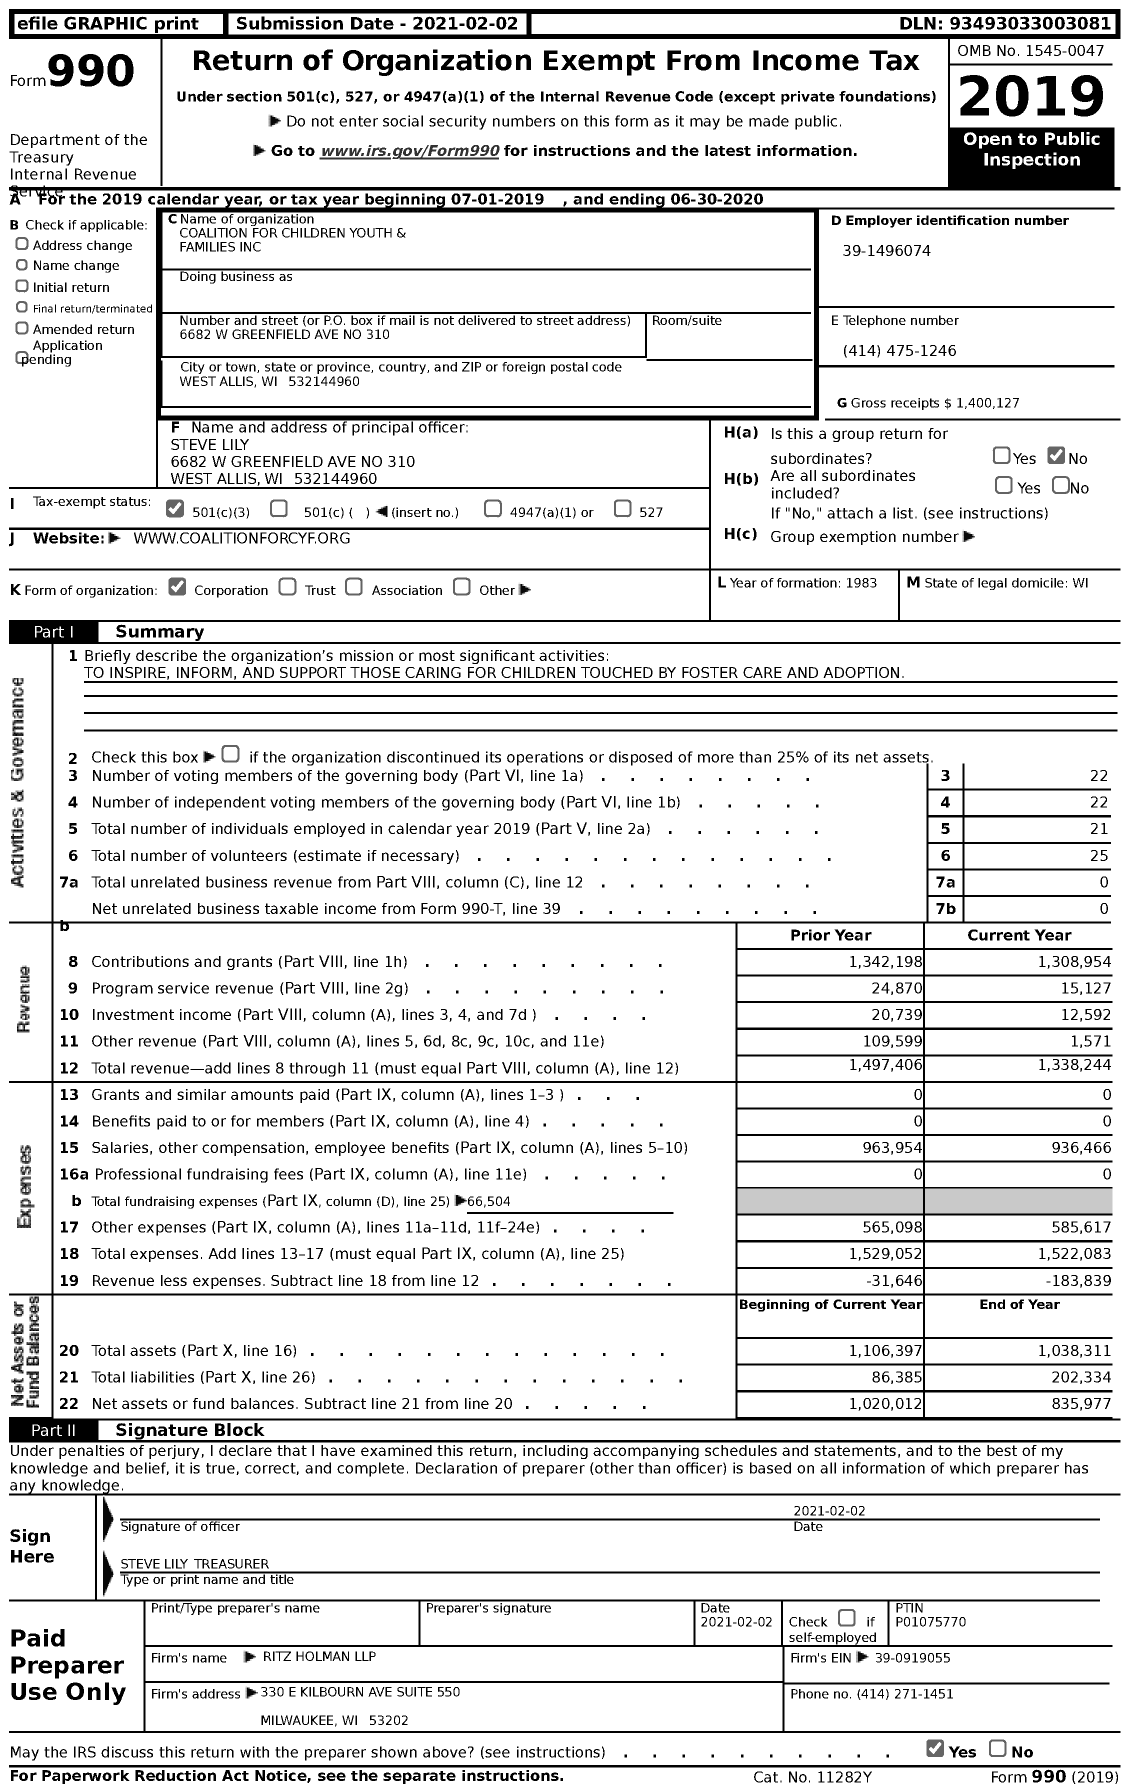 Image of first page of 2019 Form 990 for Coalition for Children Youth & Families